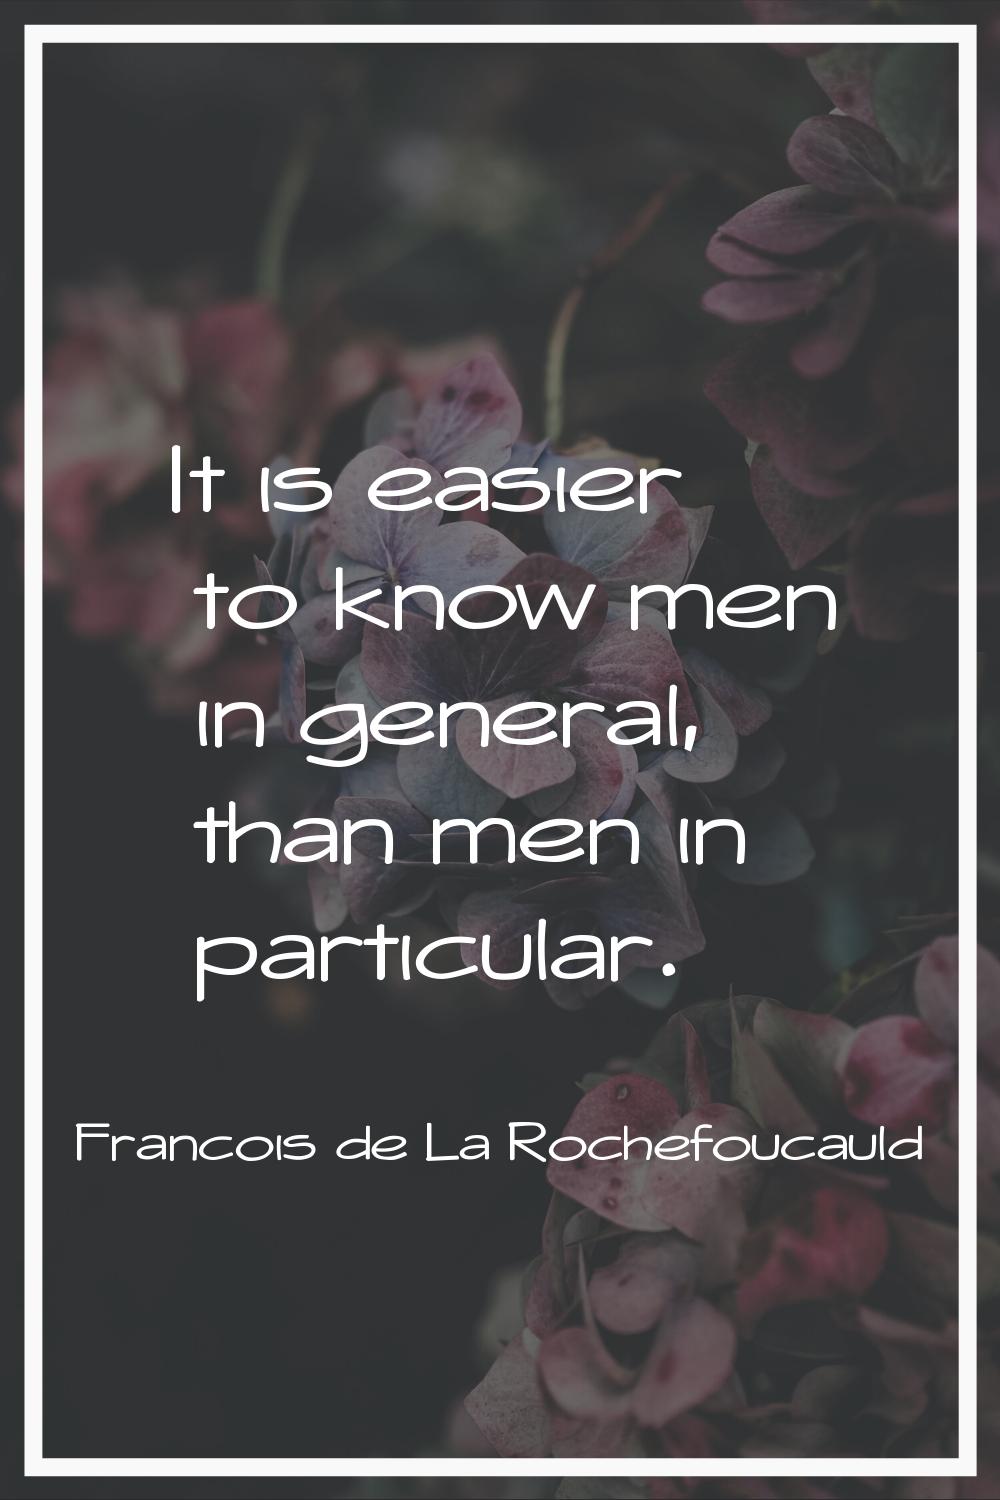 It is easier to know men in general, than men in particular.